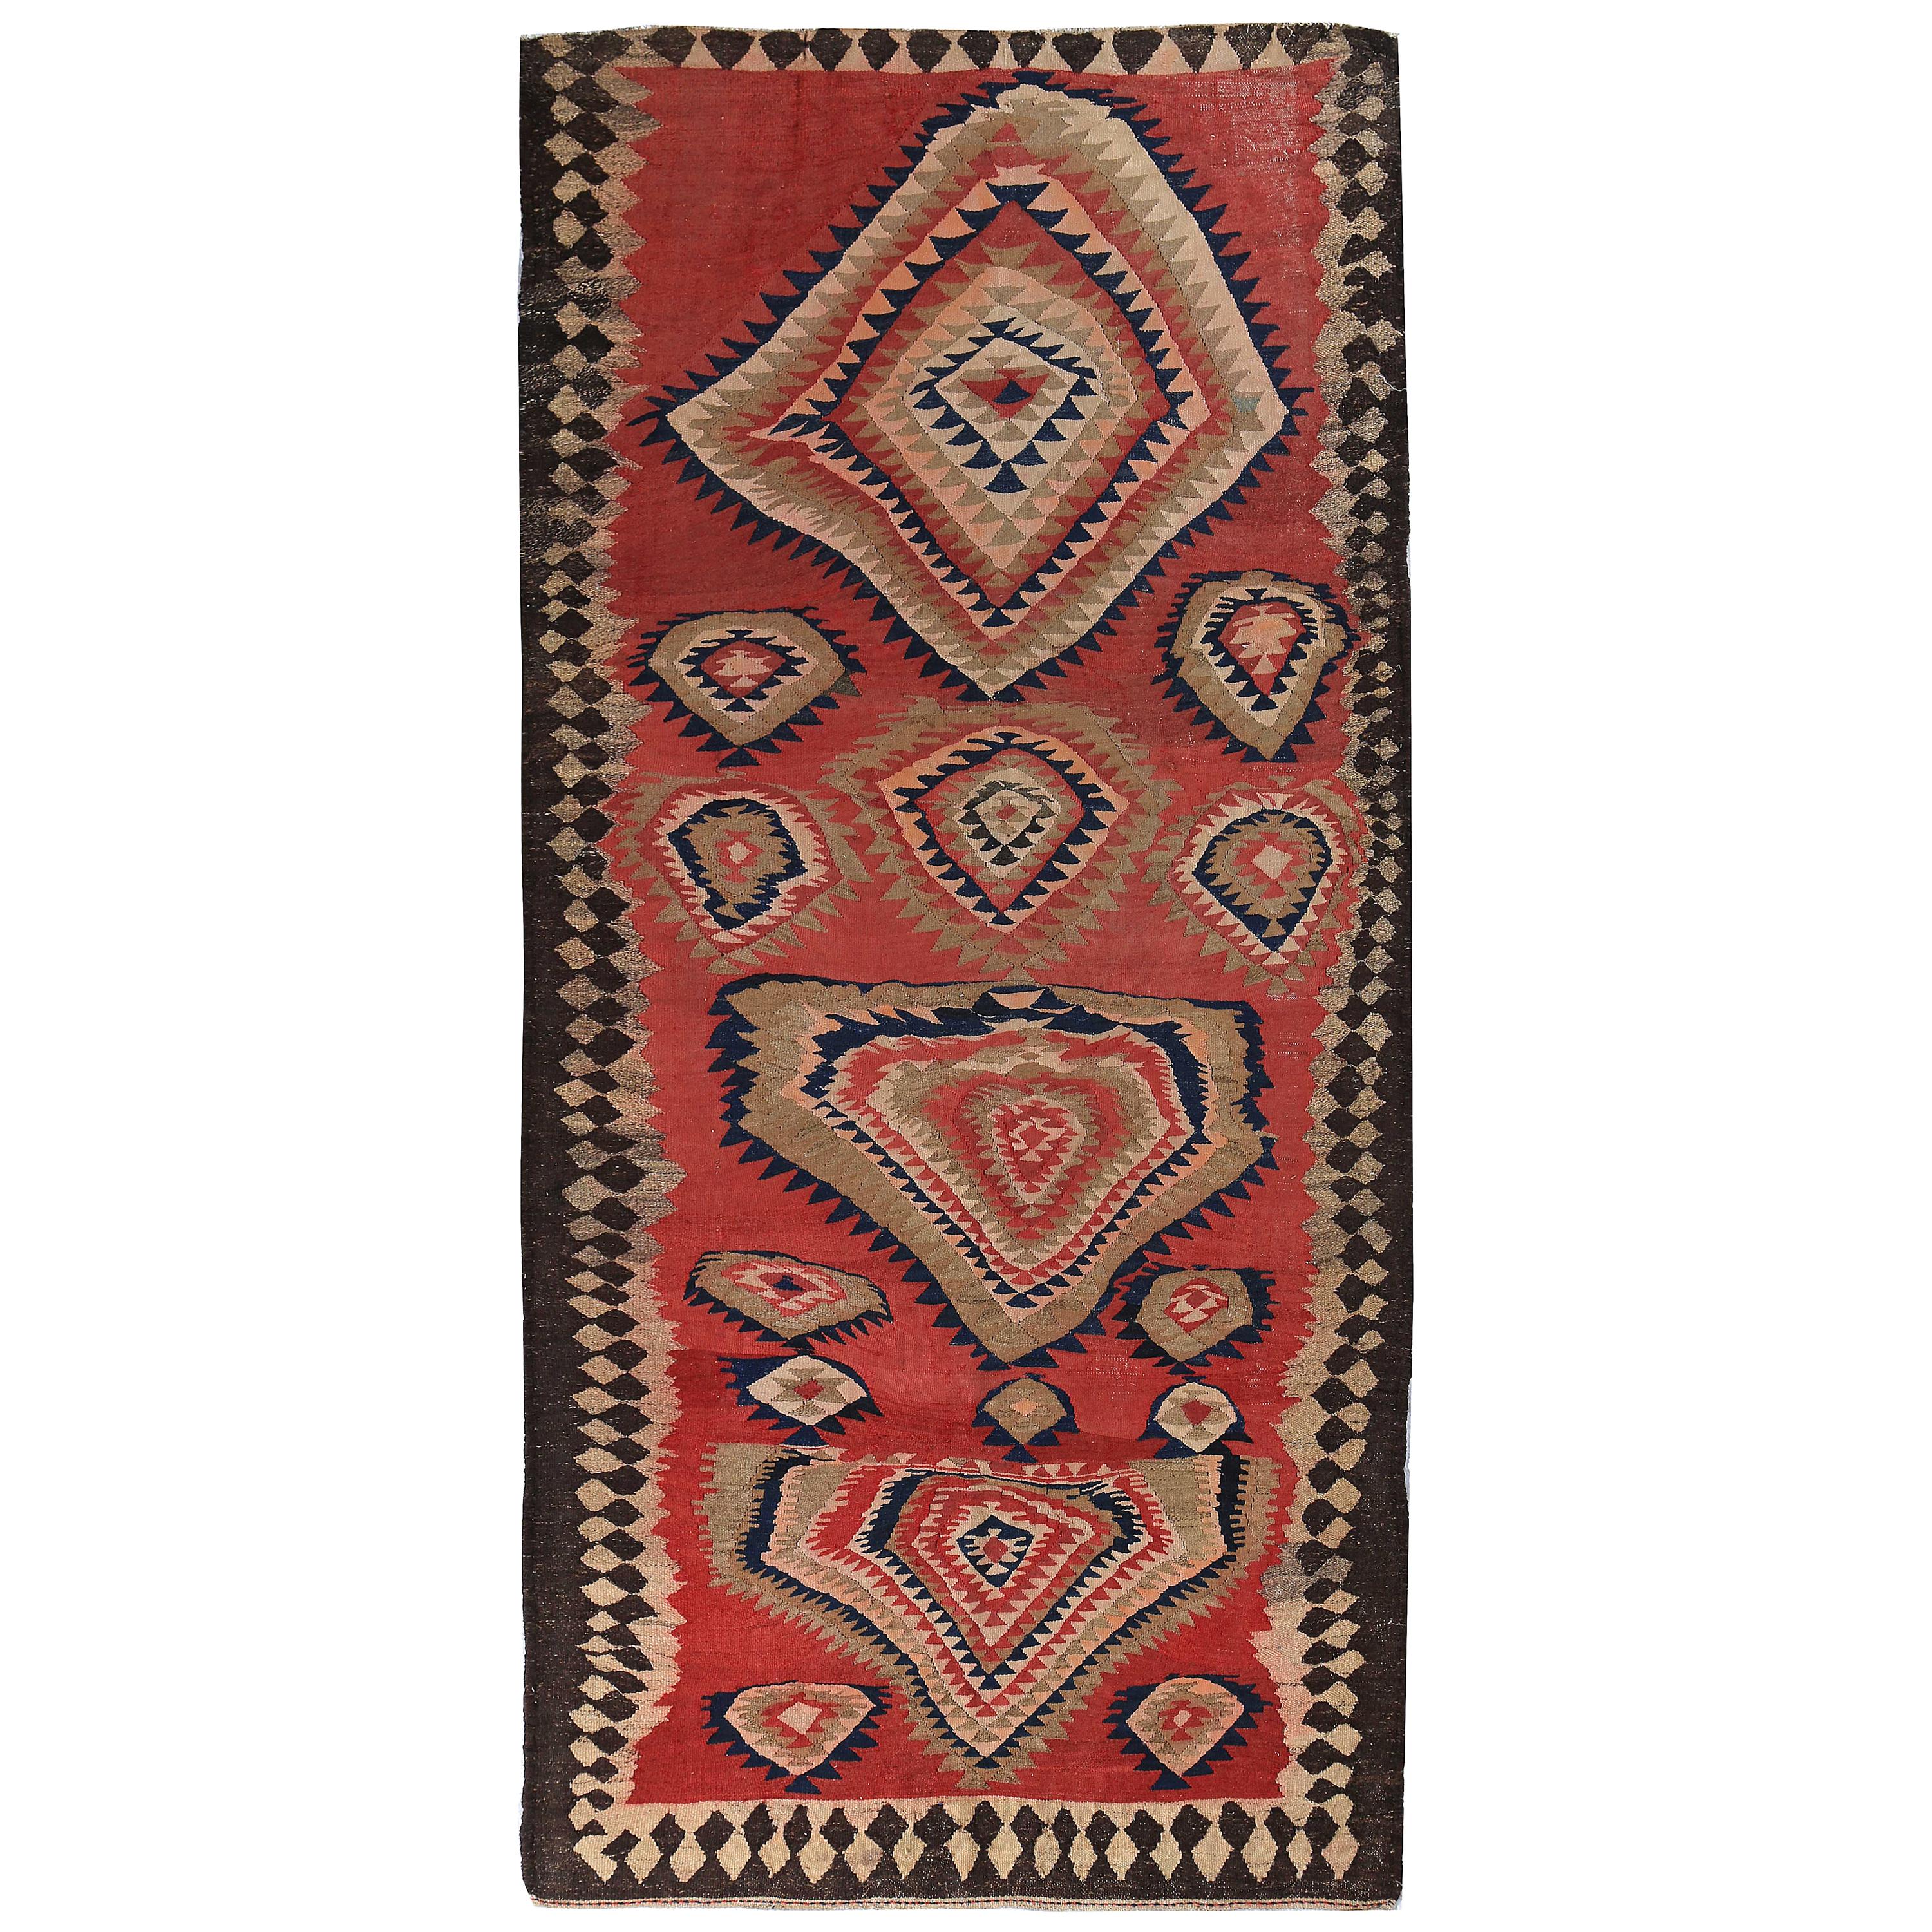 New Turkish Kilim Rug with Beige & Navy Tribal Medallions on Red and Brown Field